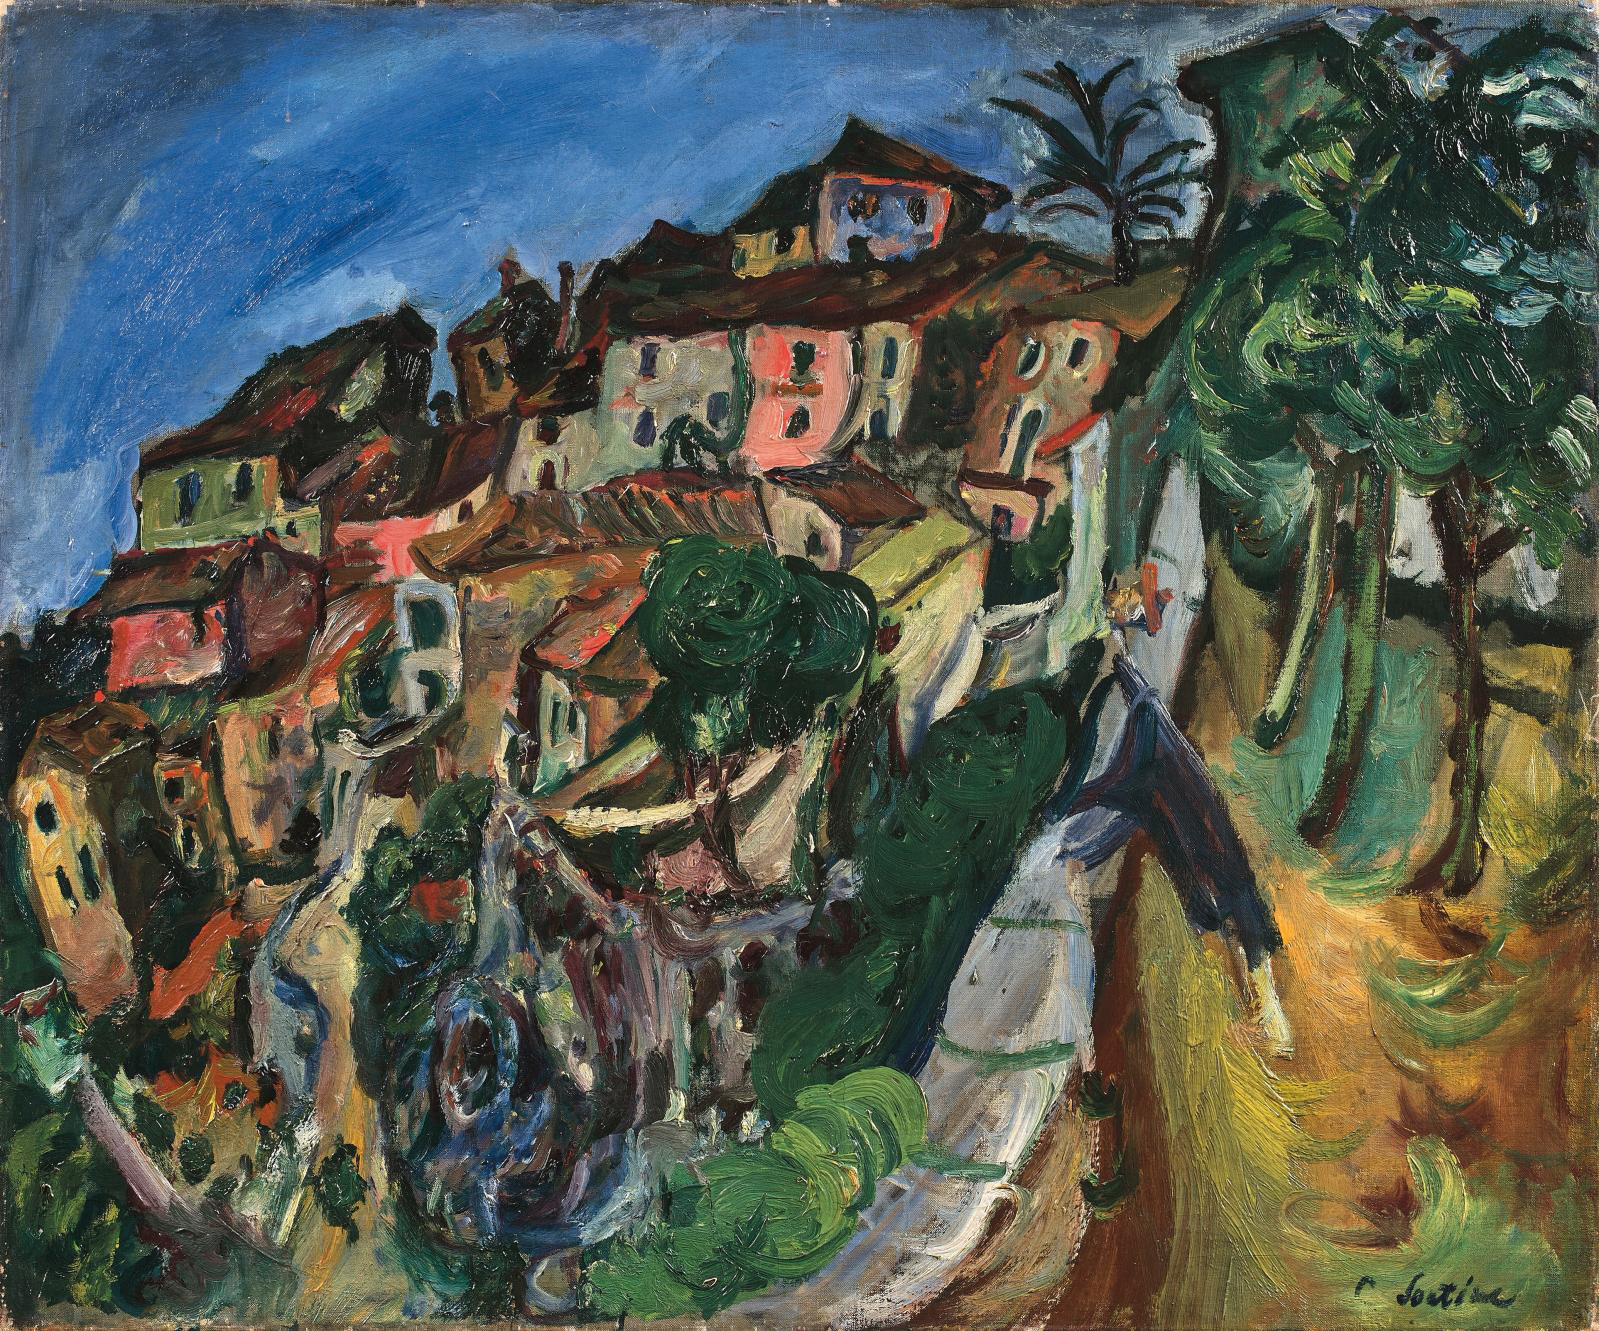 The Expressionist Landscape, Soutine-Style